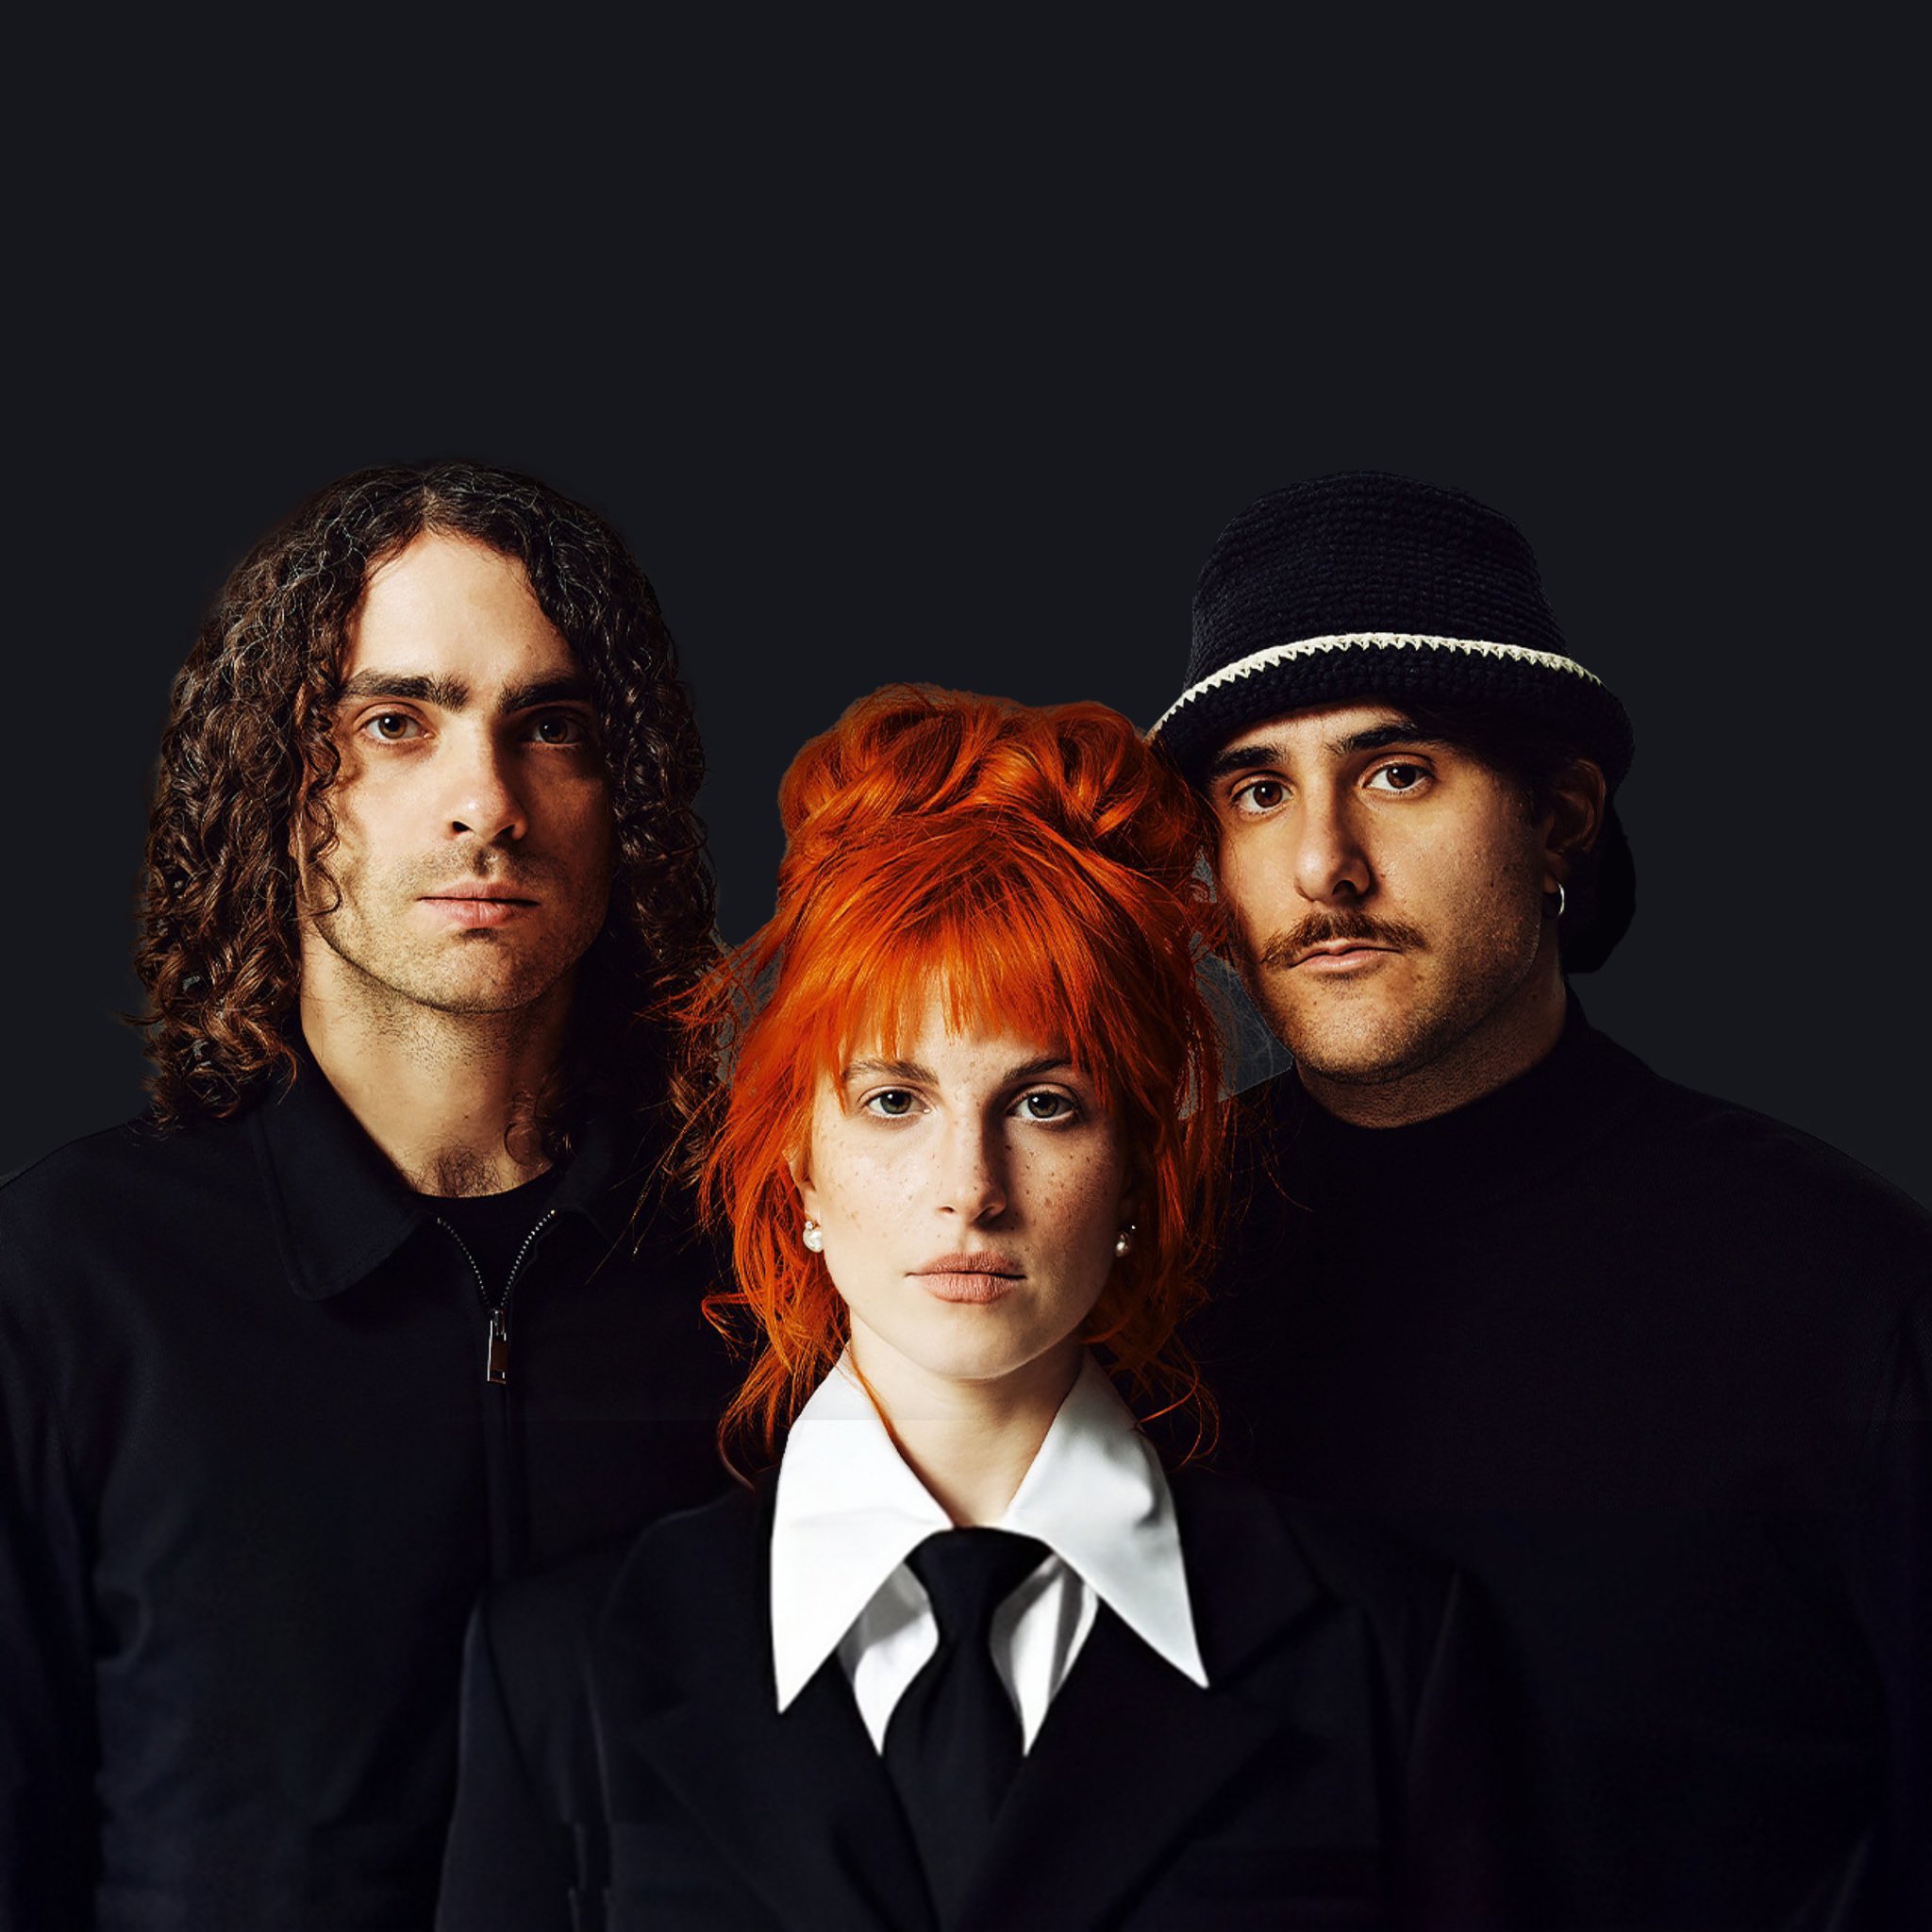 Reflecting On: Paramore – Brand New Eyes – it's all dead